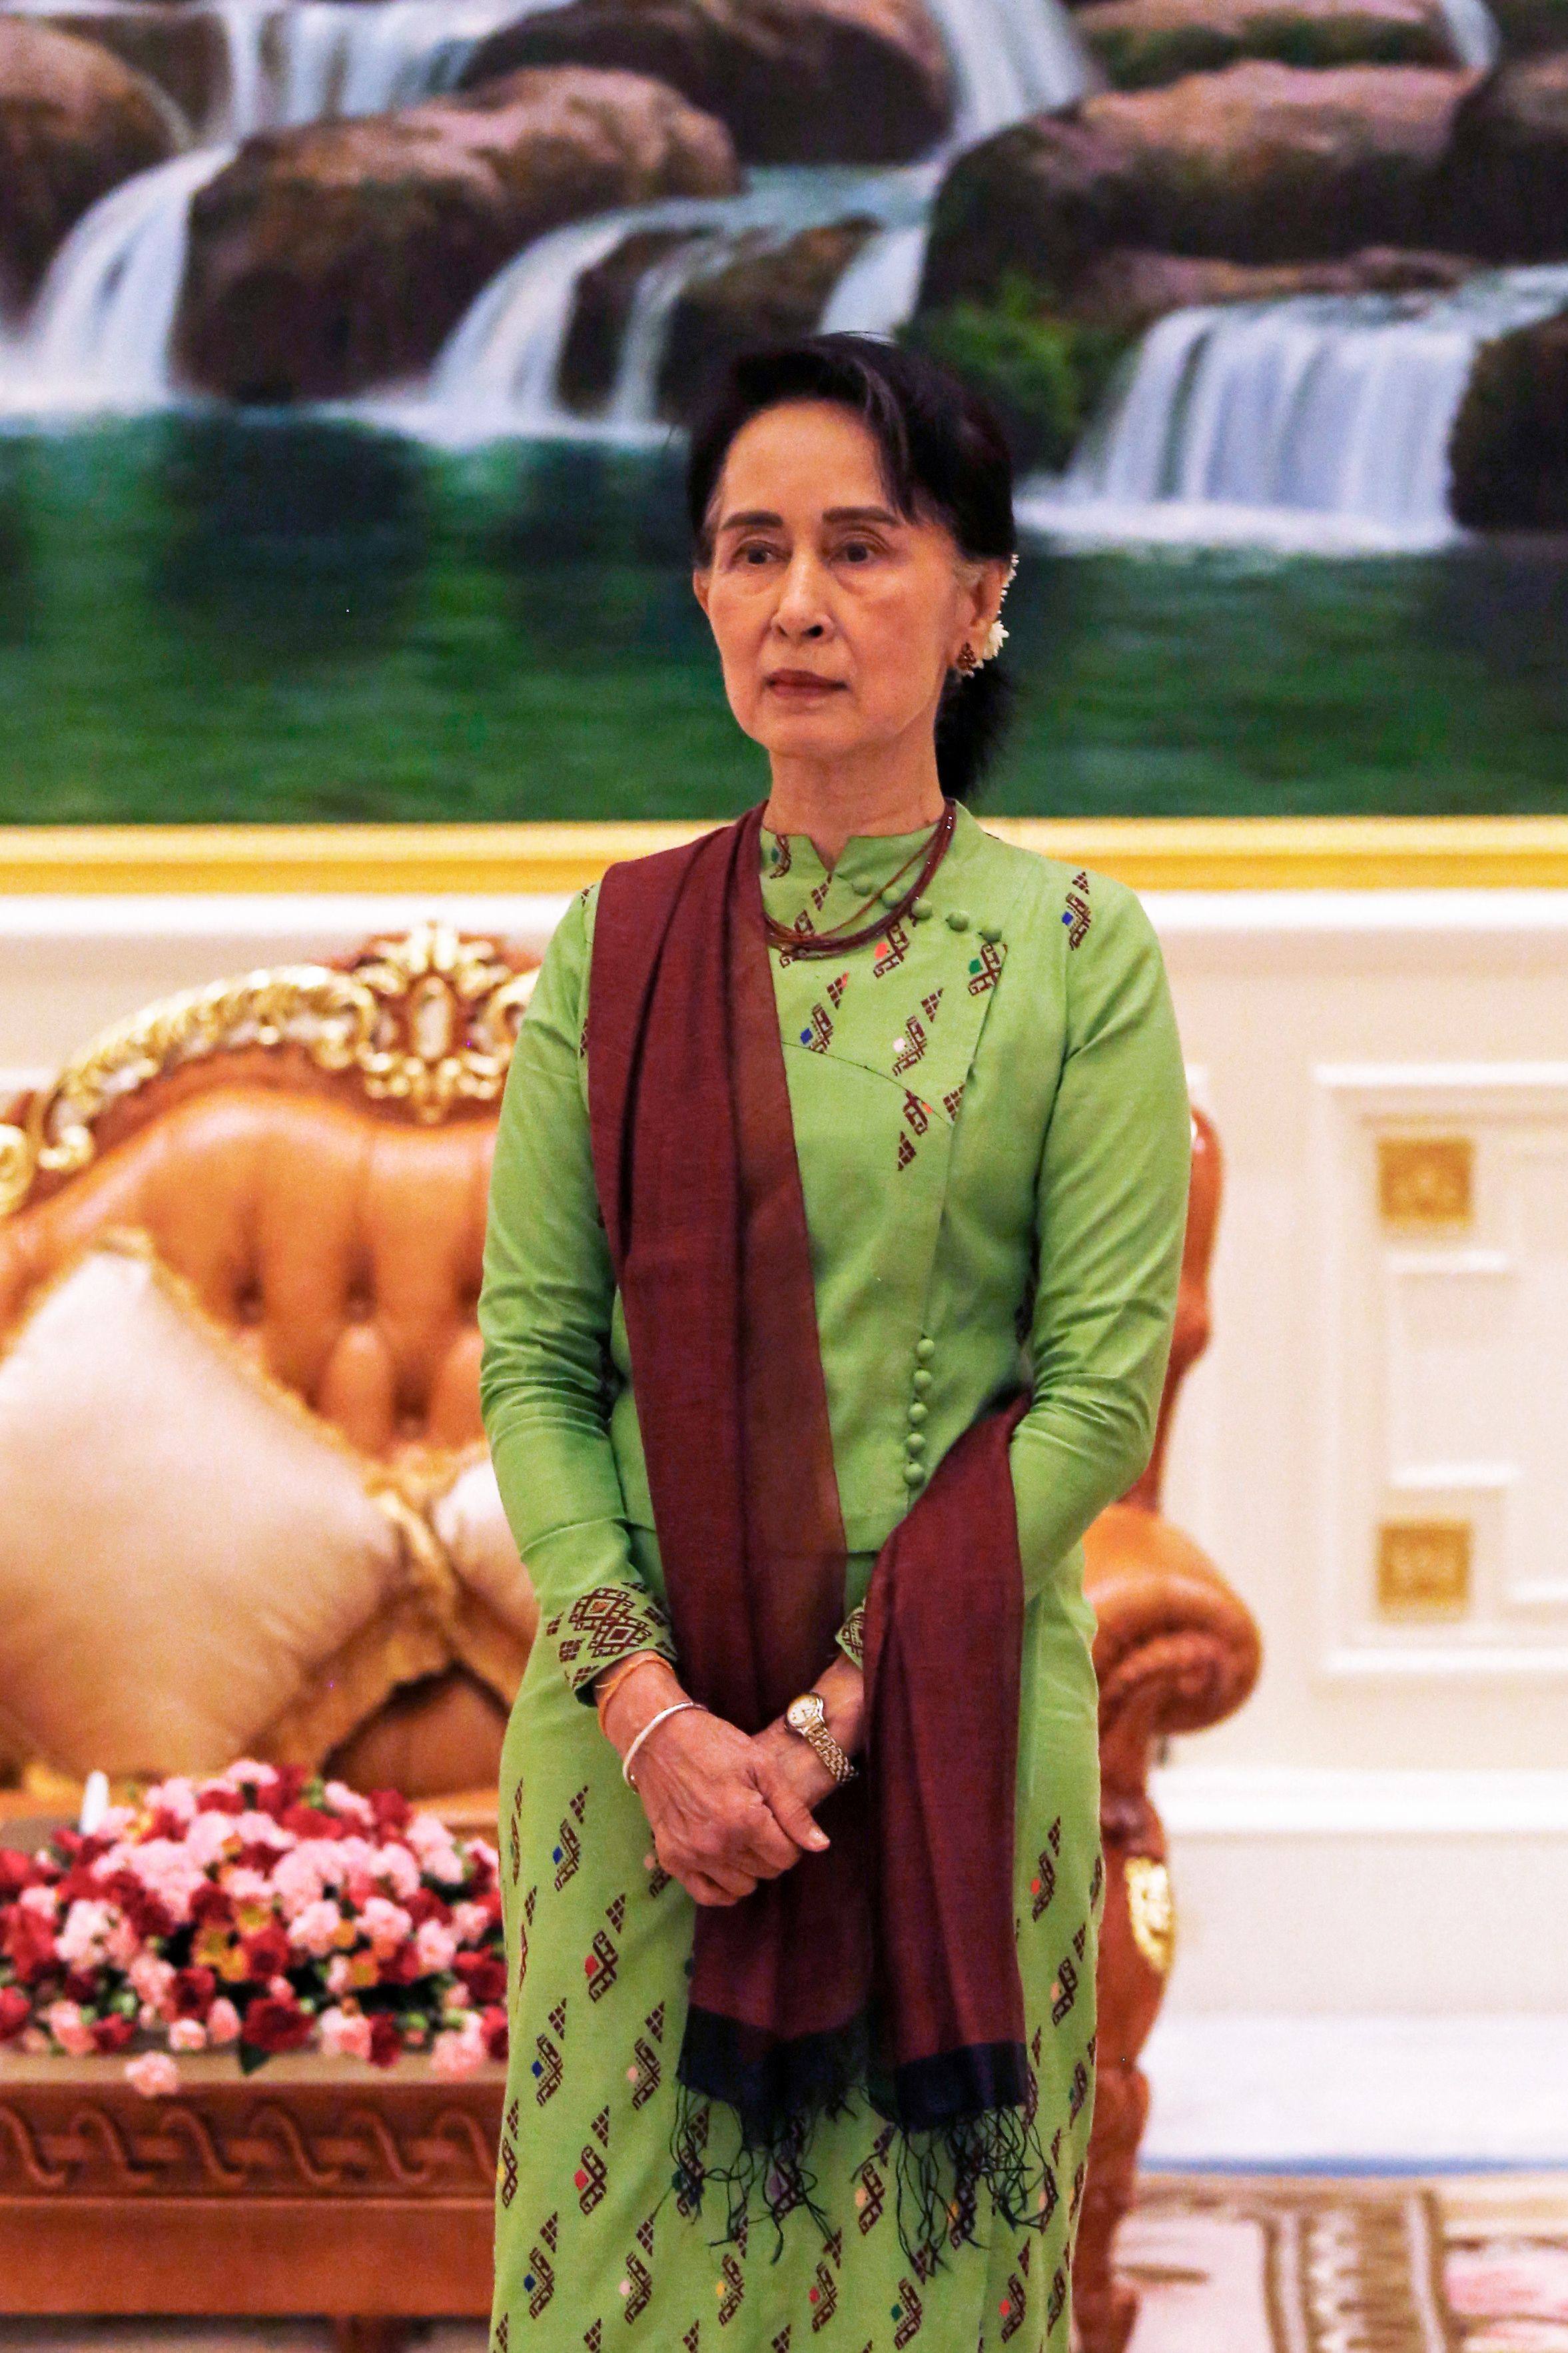 Aung San Suu Kyi has been detained since the February 1 coup, alongside the other leaders of her party. Photo: AFP